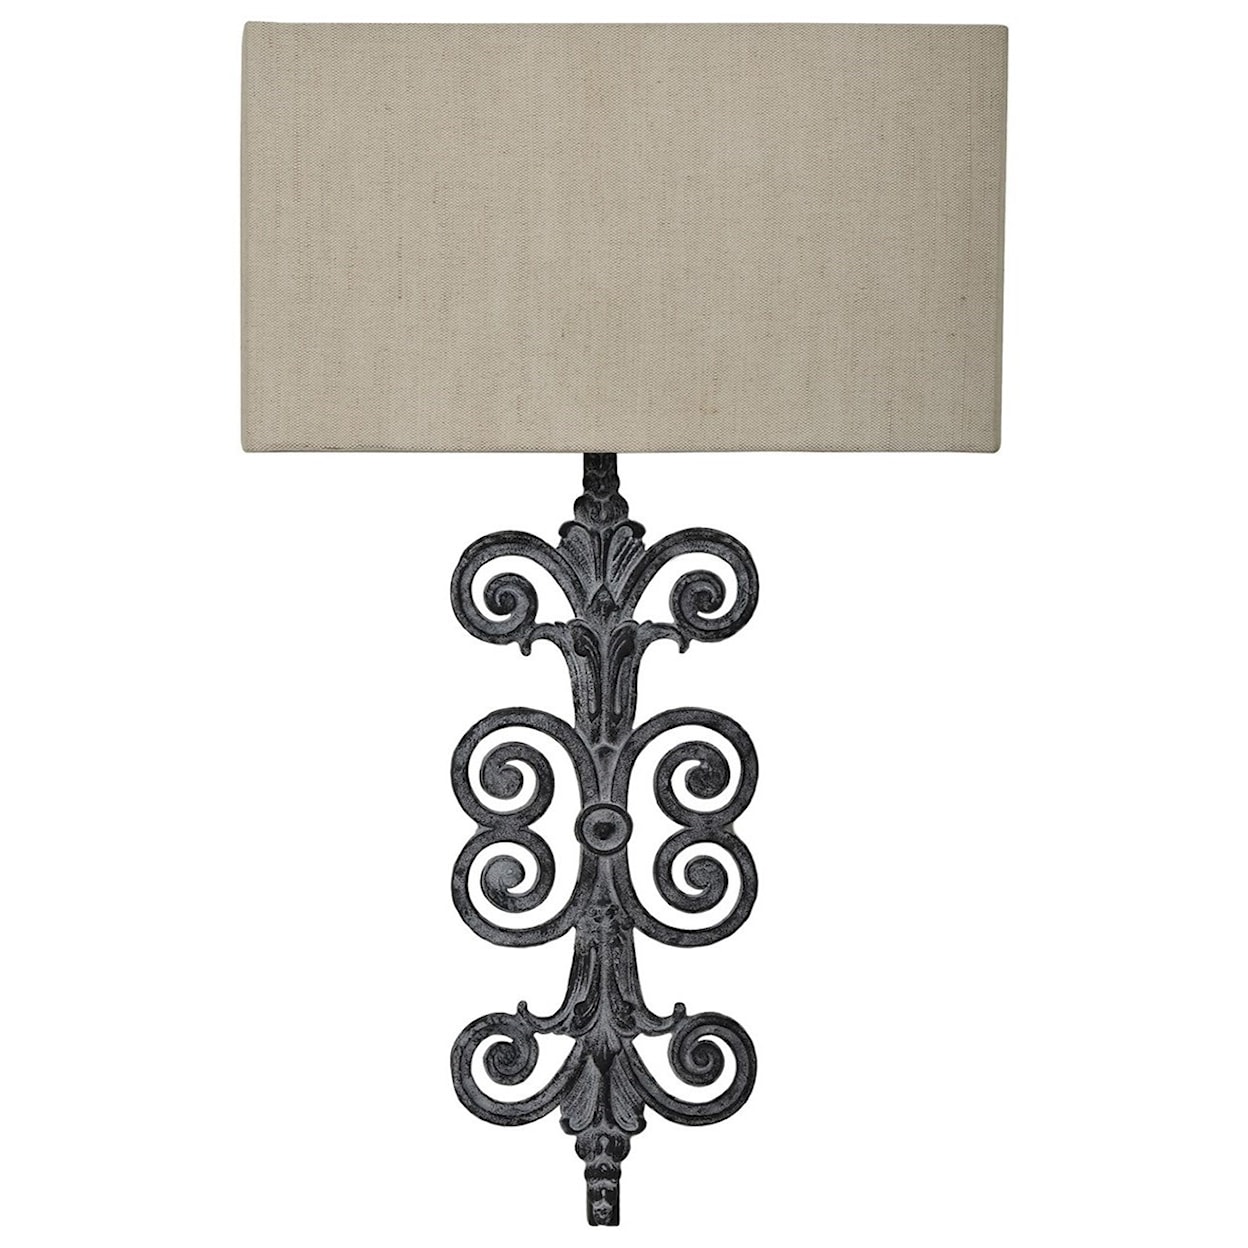 Crestview Collection Lighting Lazzaro Wall Lamp